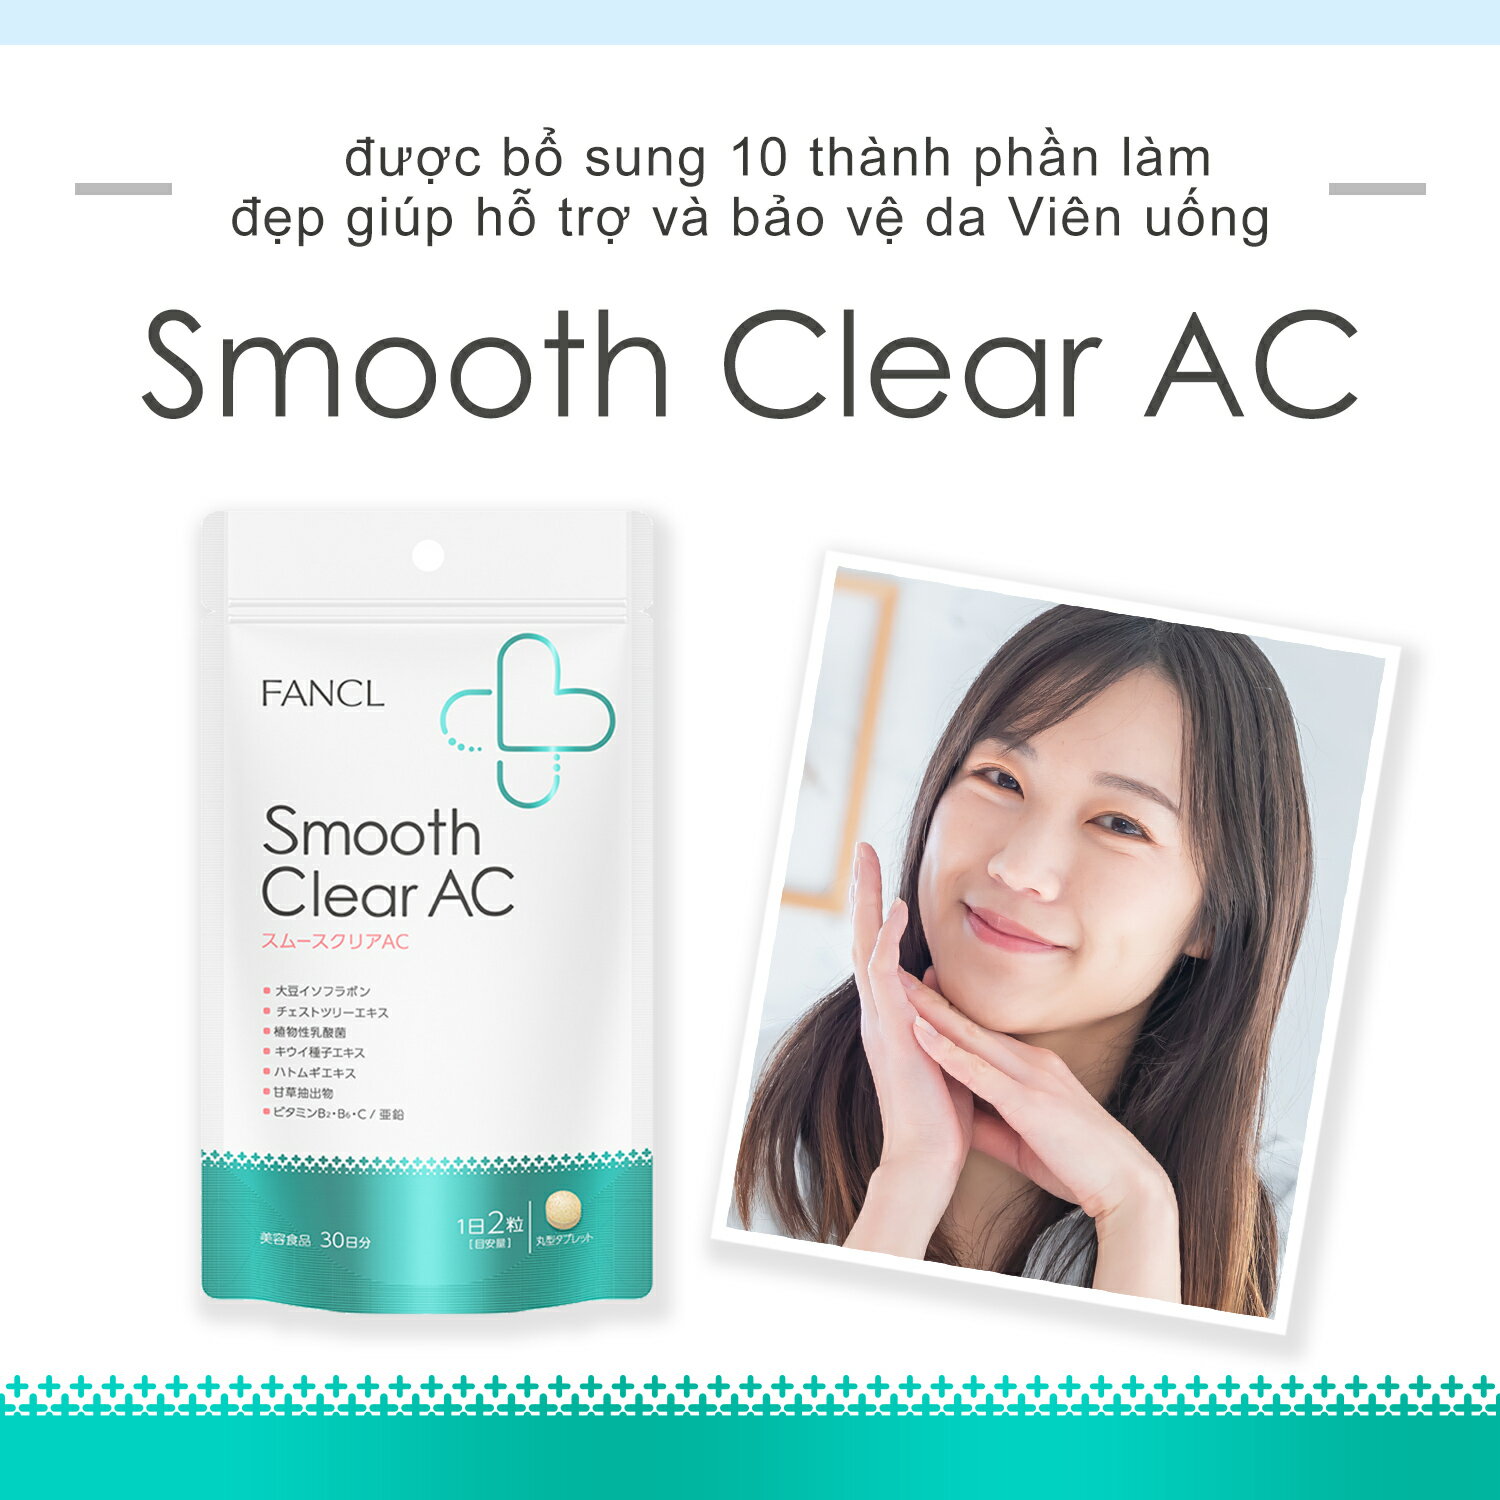 Smooth Clear AC 60days 【FANCL offical】Vietnamese page ファンケル スムースクリアAC 60日分 [supplement soy isoflavone aglycon vitamin vitamin c vitamin d zinc lactic acid bacterium Hatomugi beauty health smoothclearac] 2